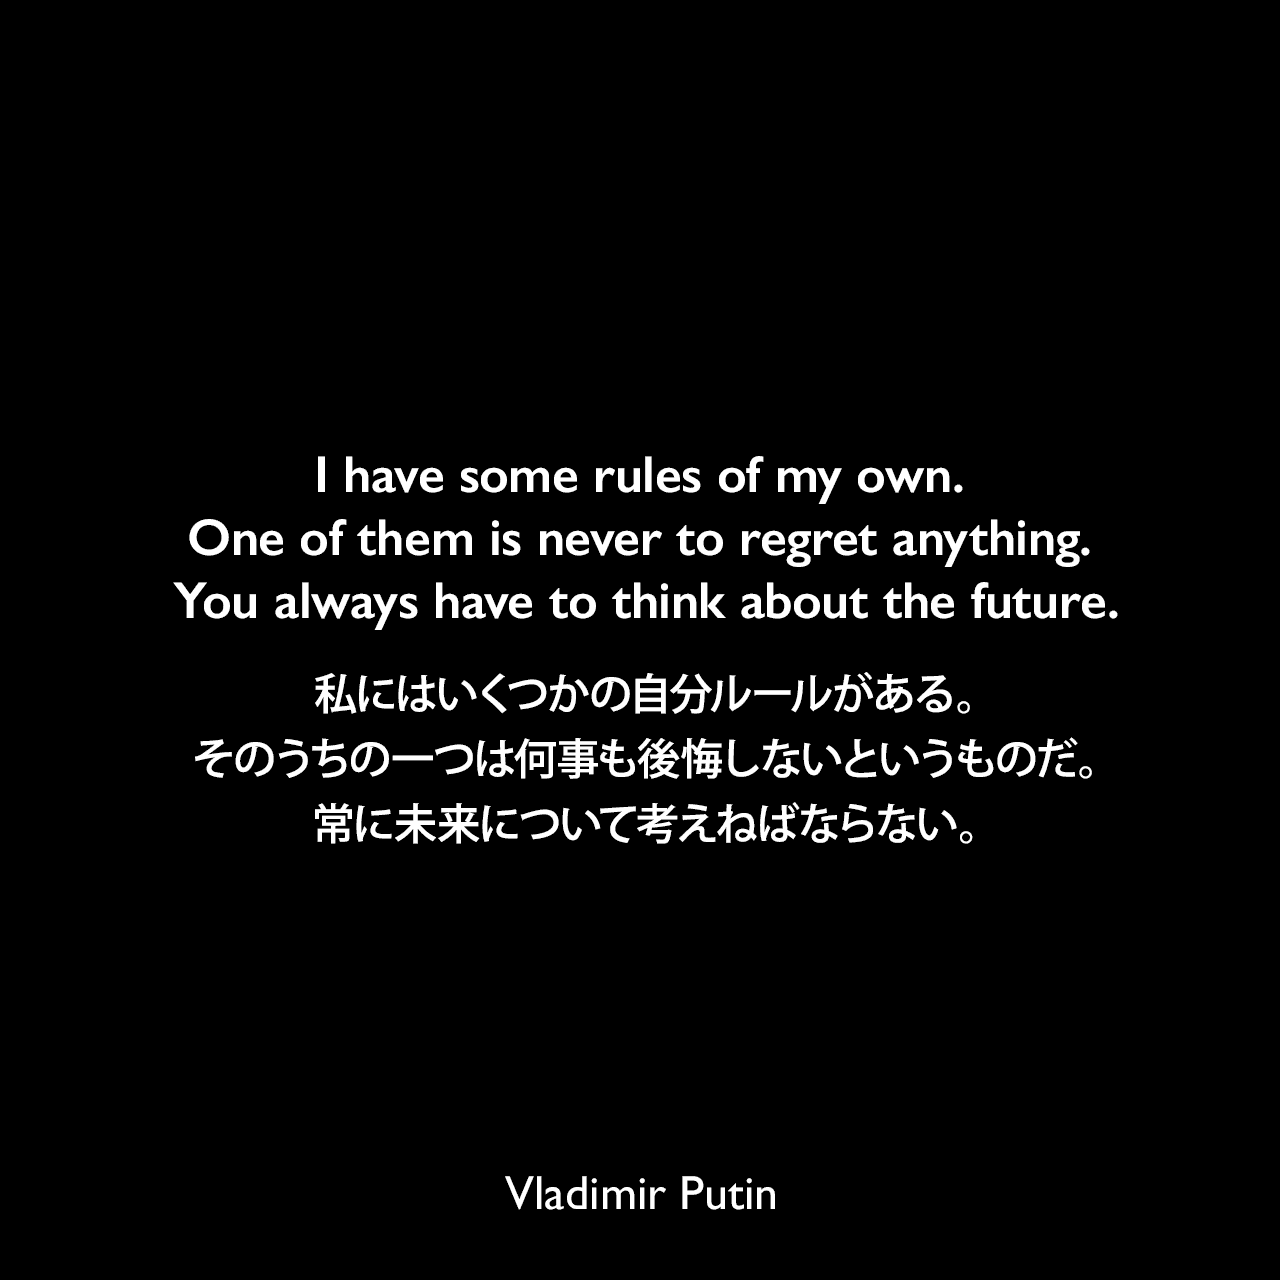 I have some rules of my own. One of them is never to regret anything. You always have to think about the future.私にはいくつかの自分ルールがある。そのうちの一つは何事も後悔しないというものだ。常に未来について考えねばならない。- ウラジーミル・プーチン「プーチン、自らを語る (First Person)」よりVladimir Putin